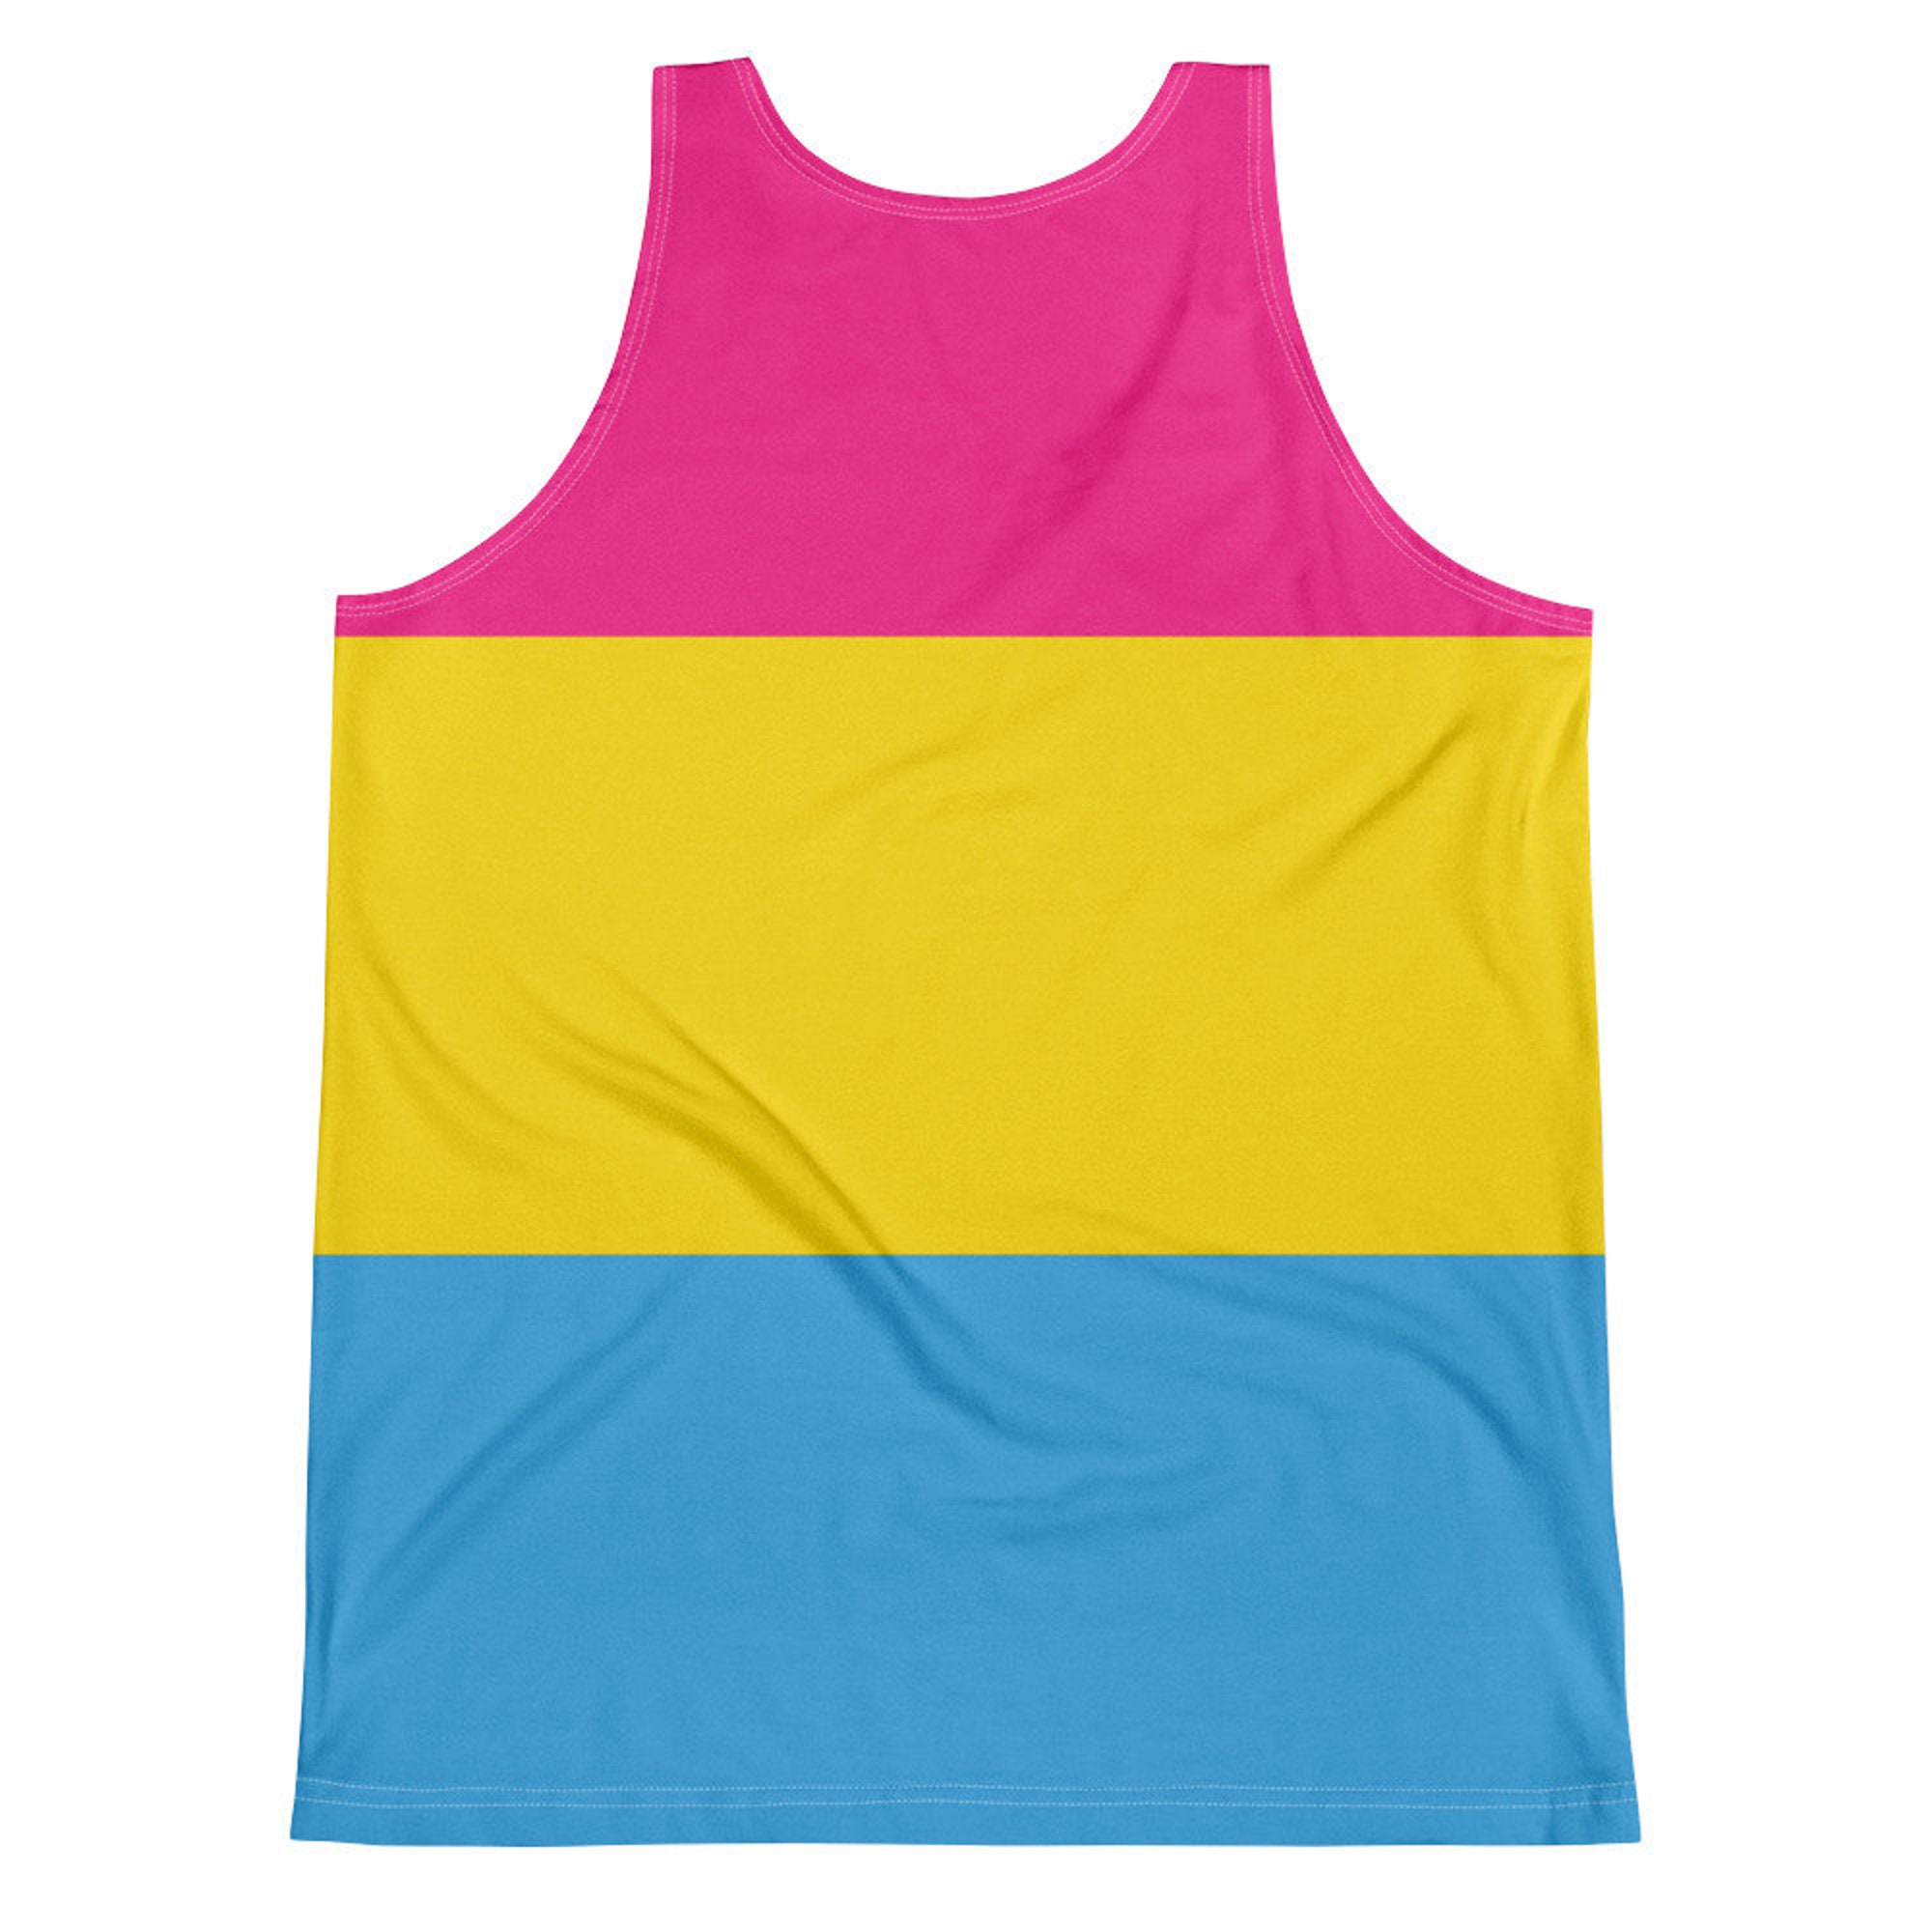 Pansexual Pride Flag All-Over Print Unisex Tank Top